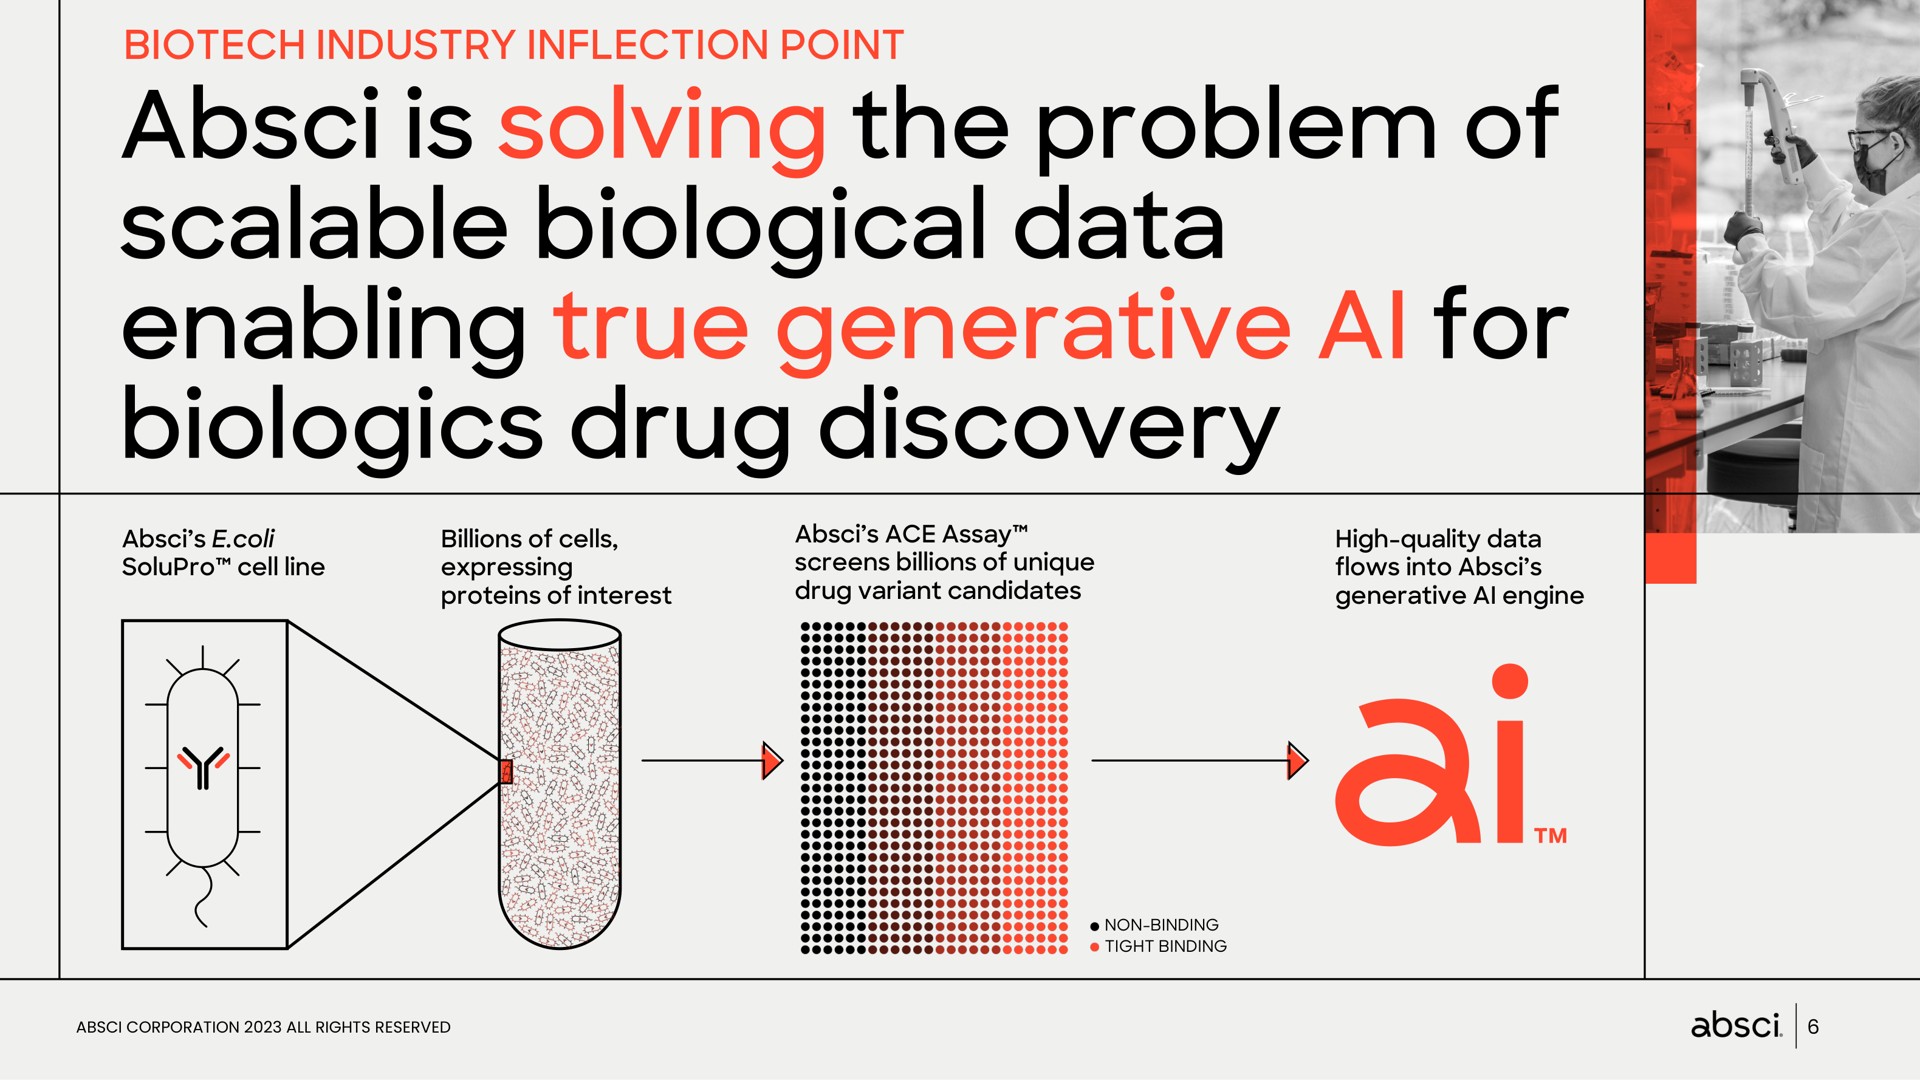 is solving the problem of scalable biological data enabling true generative for drug discovery | Absci